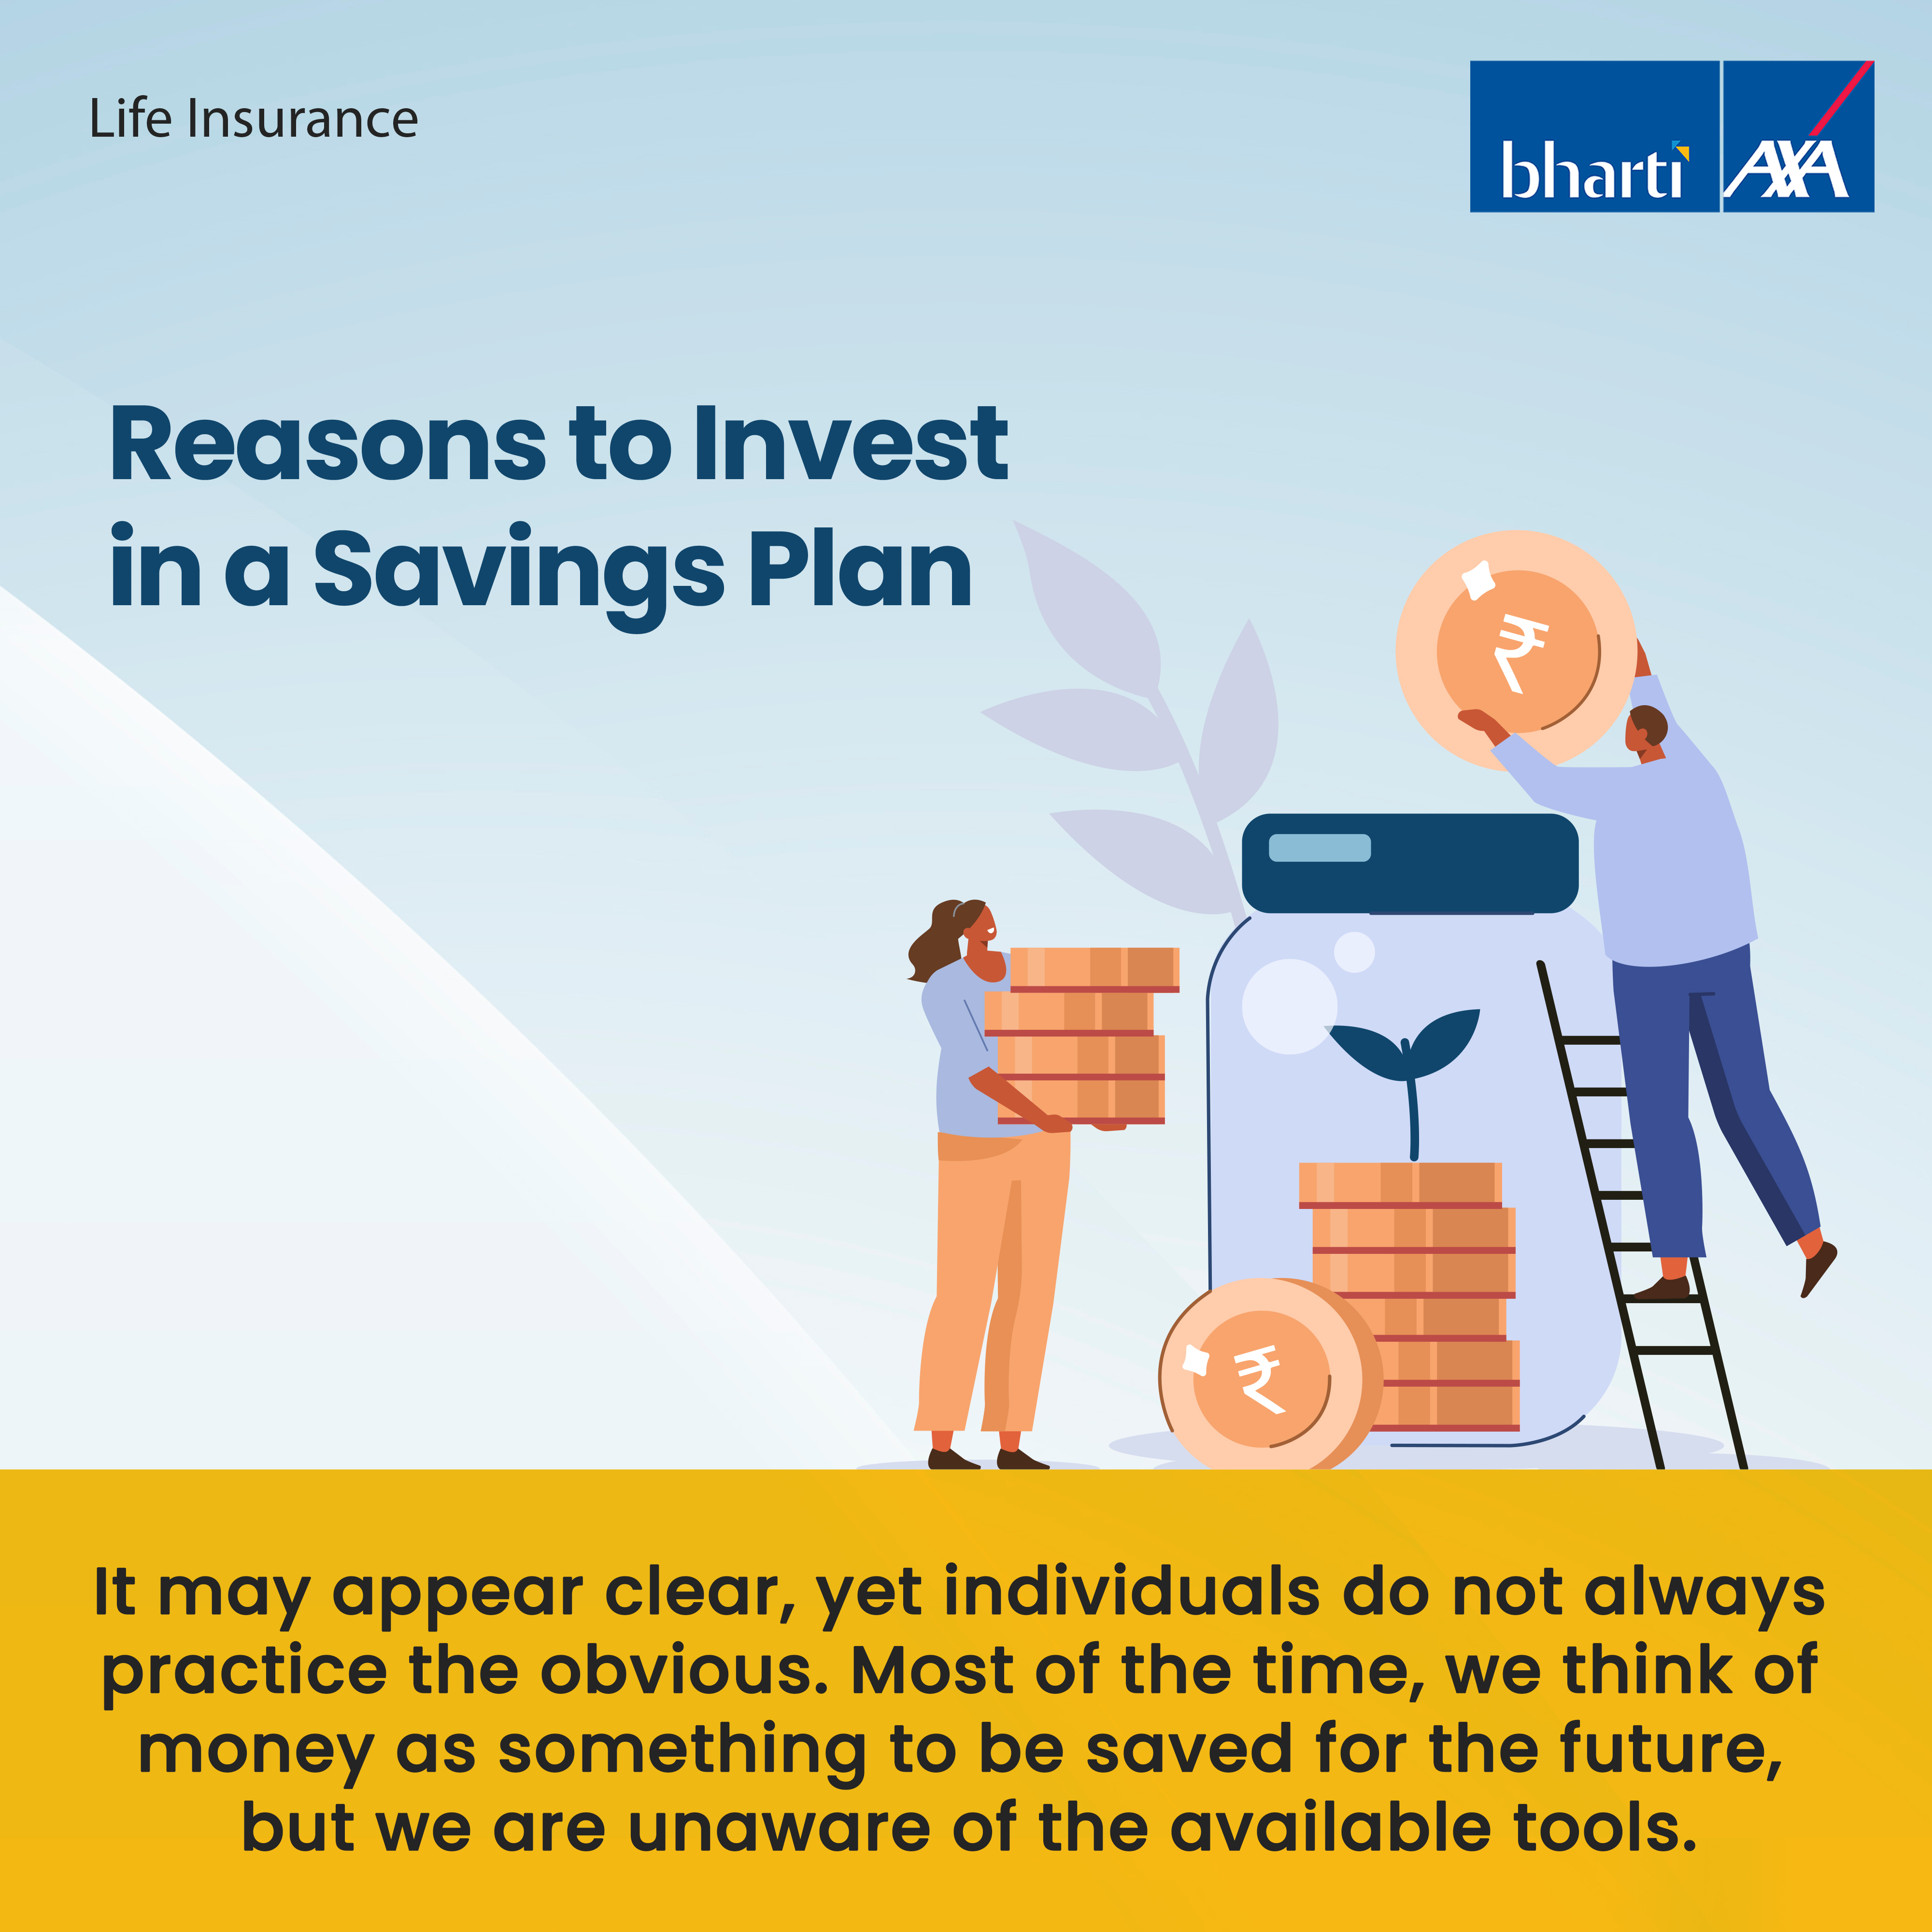 Reason to invest in a Saving Plan